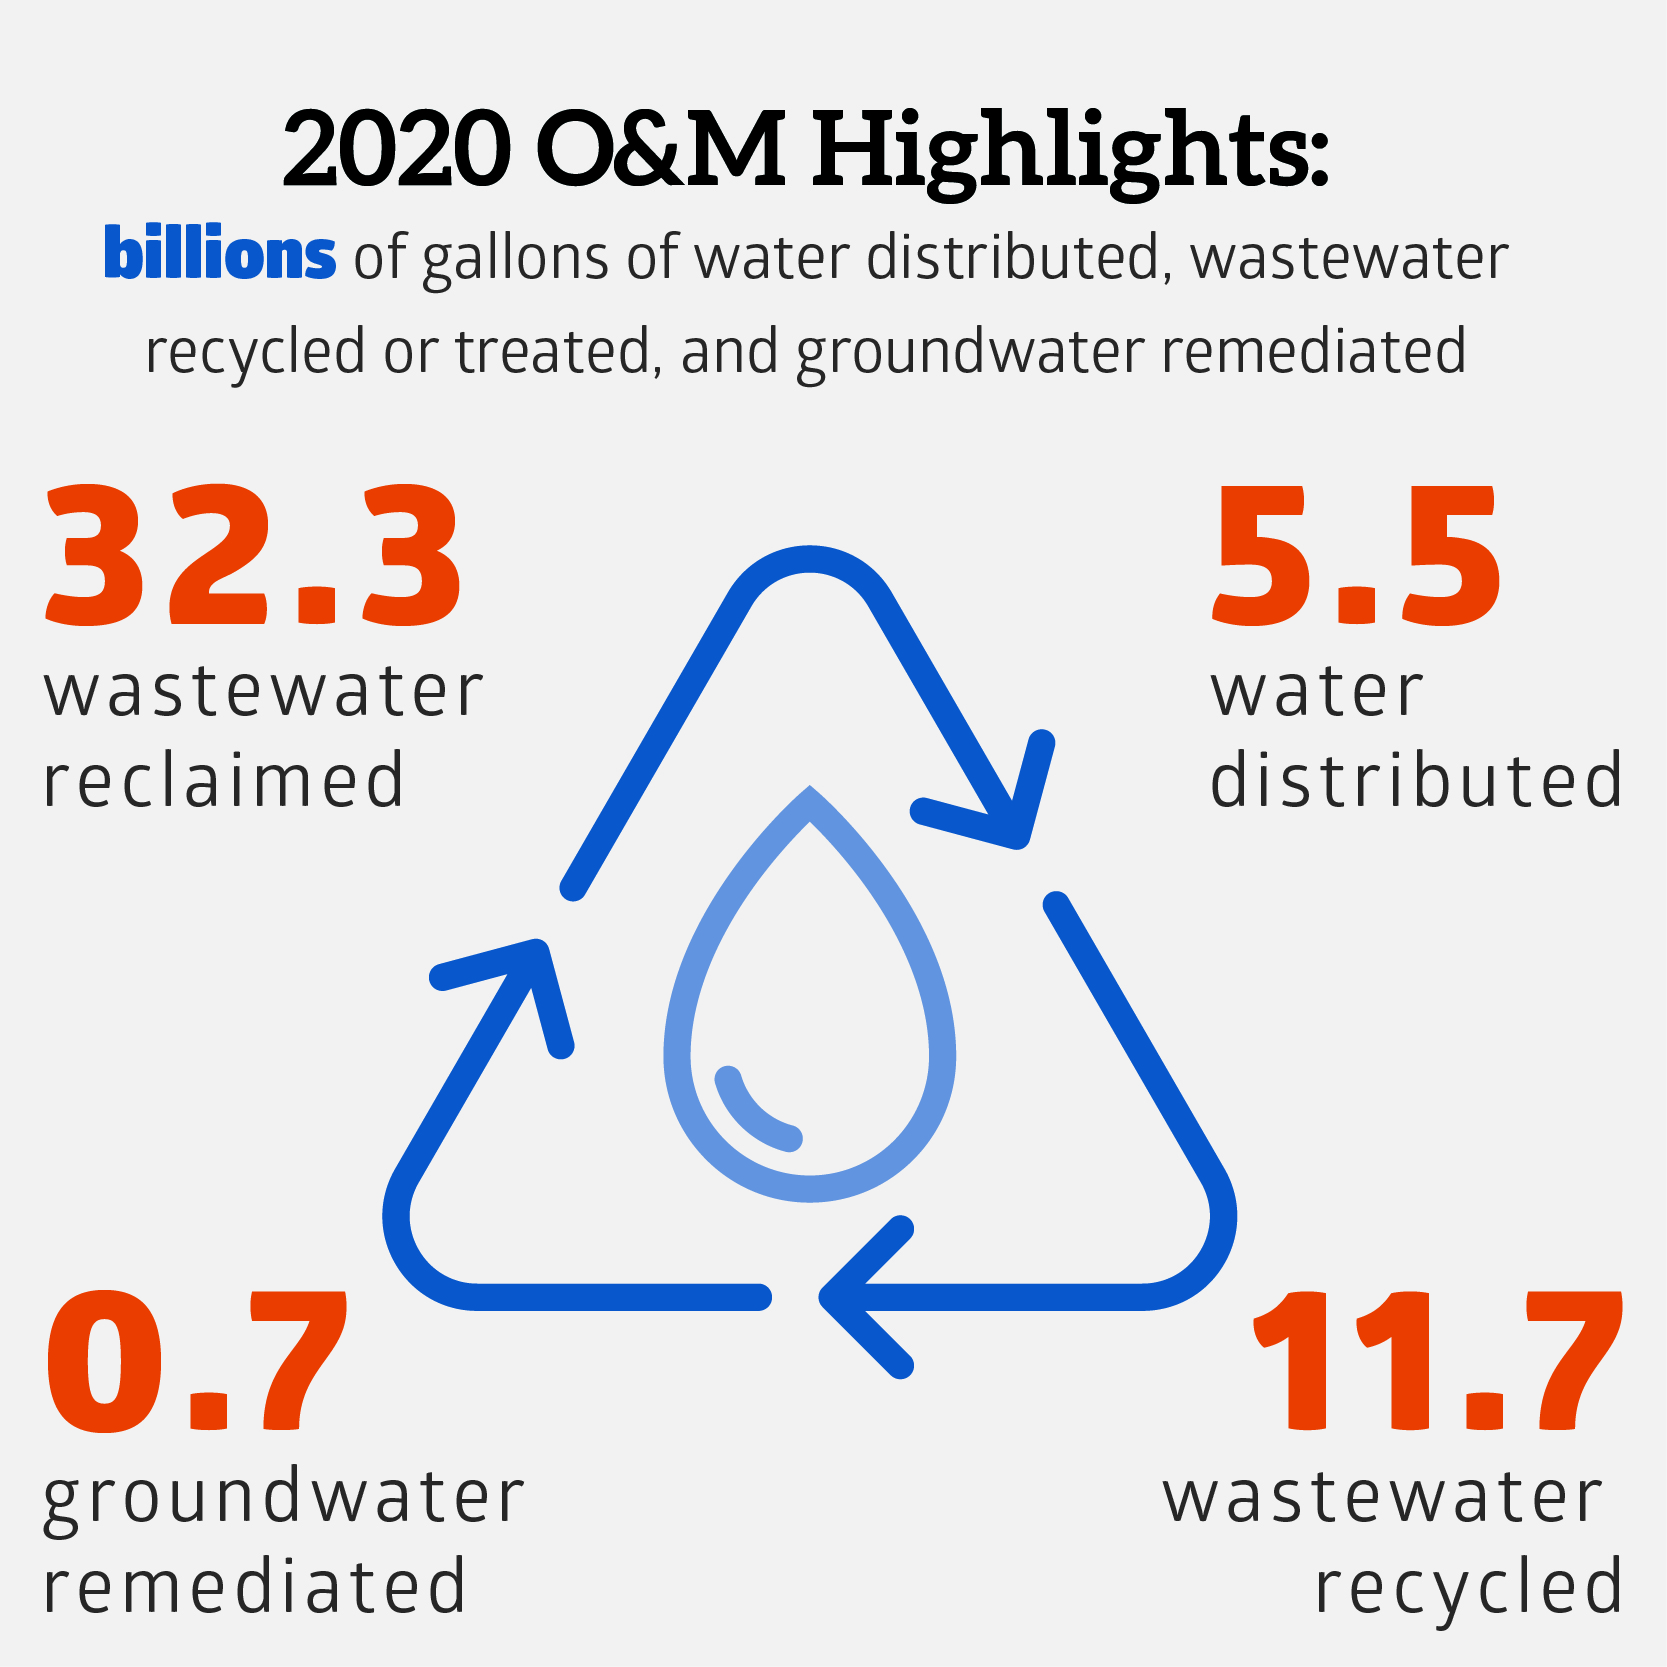 Graphic showing water treated, reclaimed, and reused in 2020